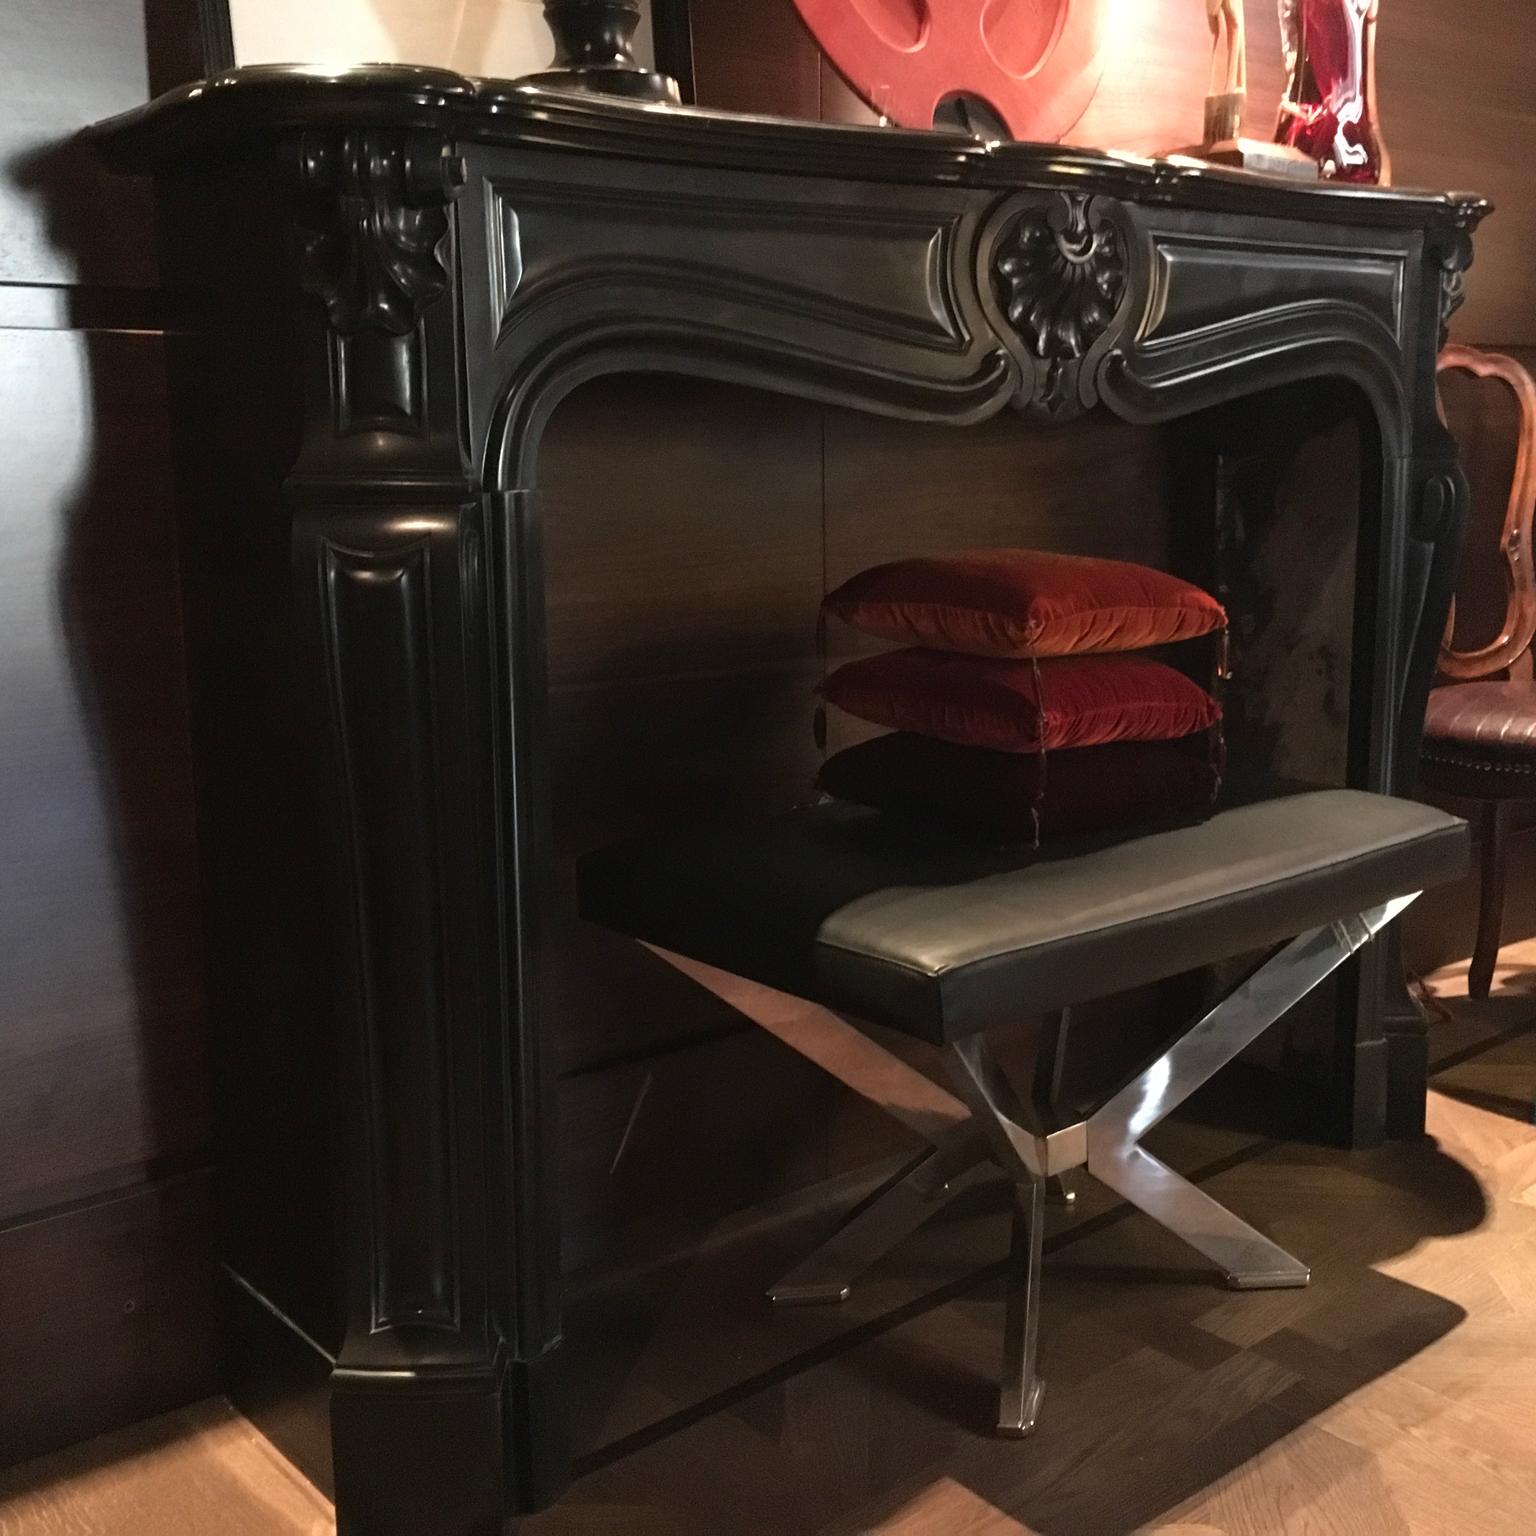 This original French fireplace is hand carved in Belgian black marble. Beautiful, elegant and contemporary for his dramatic presence and fashion color.
Wonderful richly of carved details. When a cool material becomes warm and lives.
The photos shown